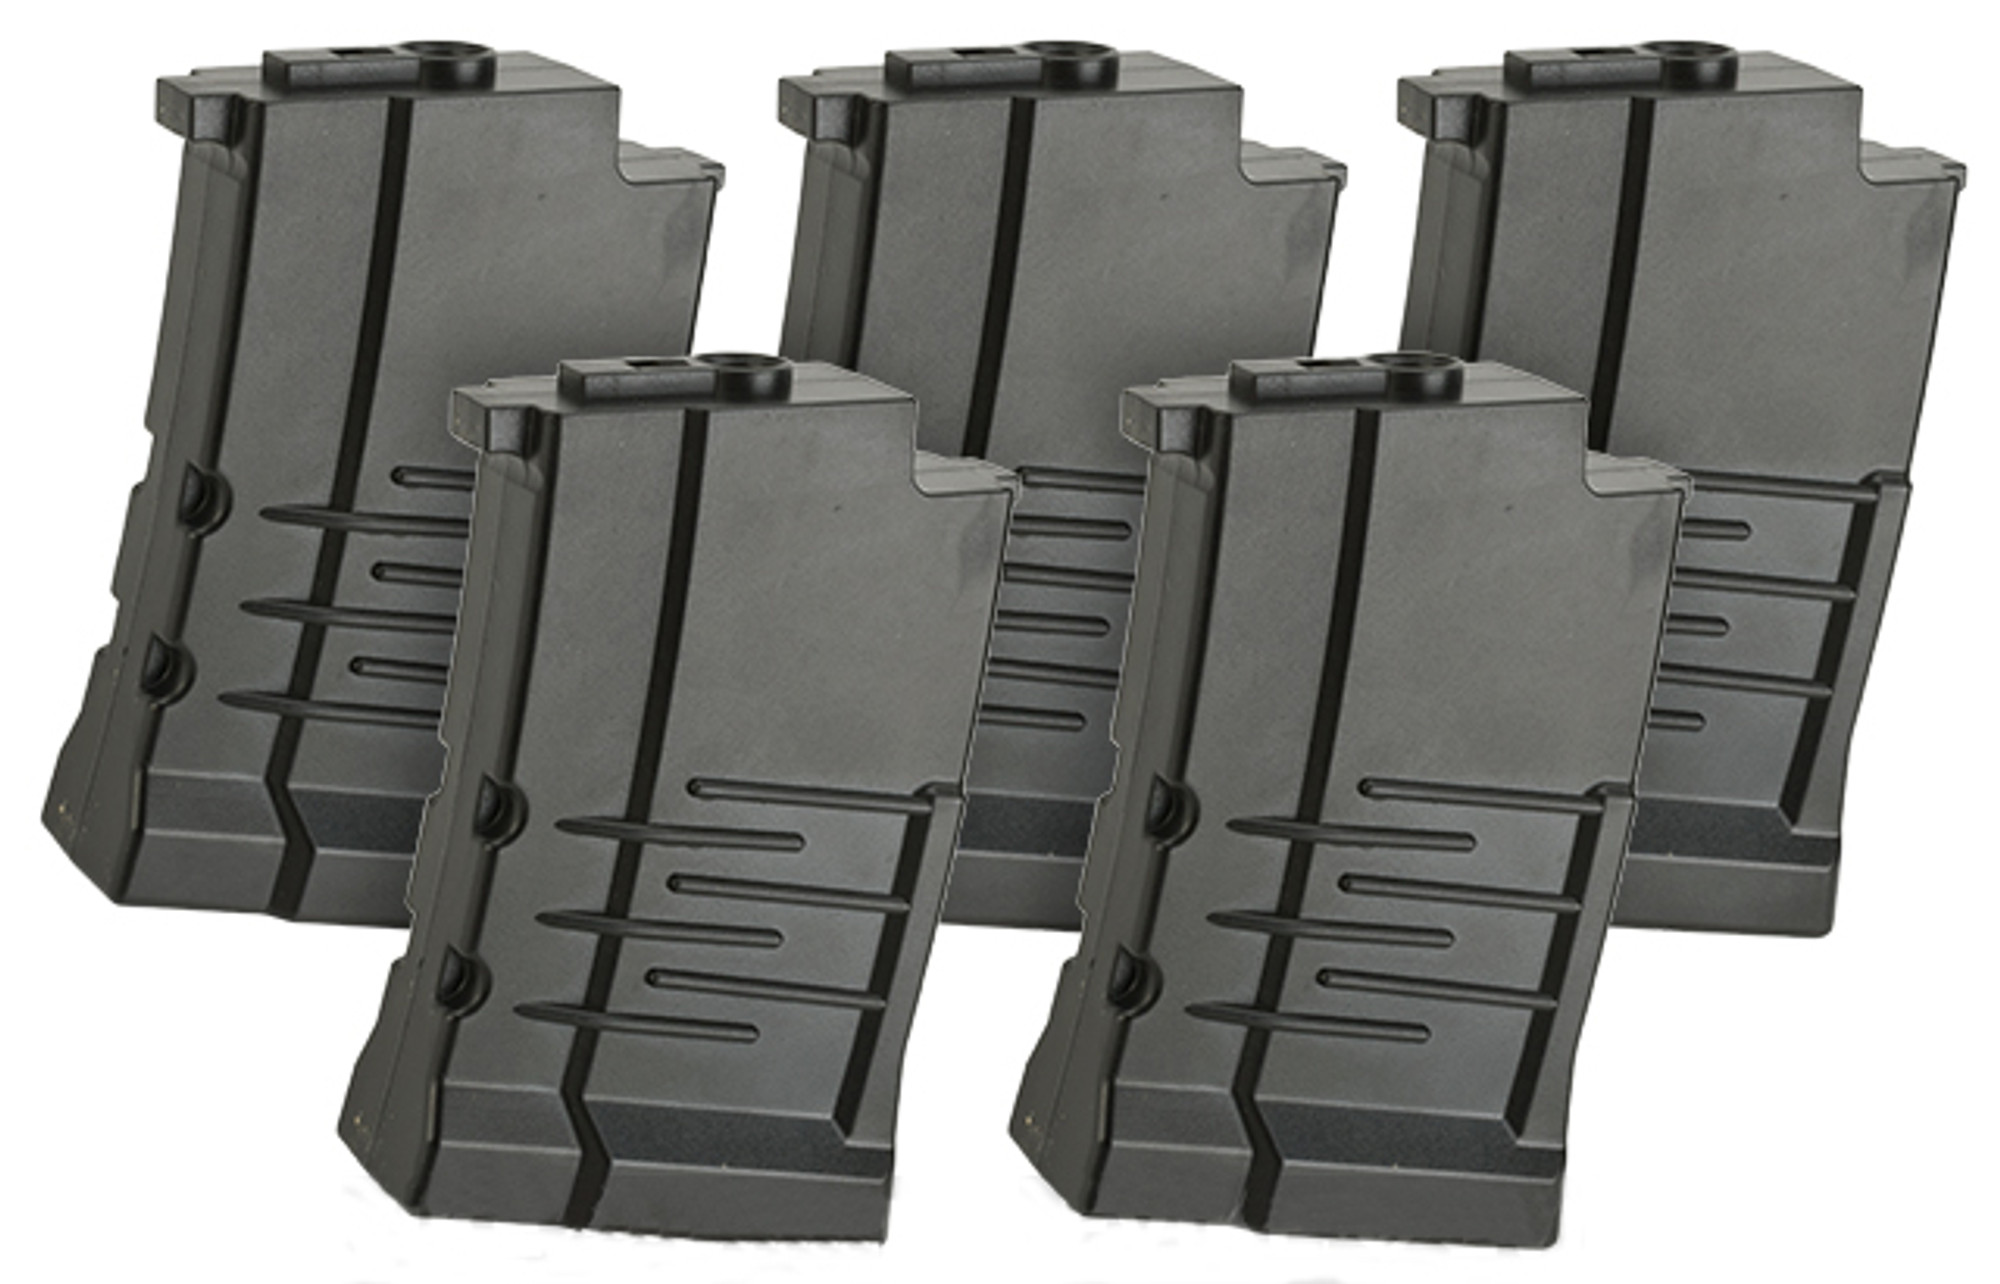 40 Round Mid-Cap Polymer Magazine for VSS Airsoft AEG Sniper Rifles by King Arms - Set of 5